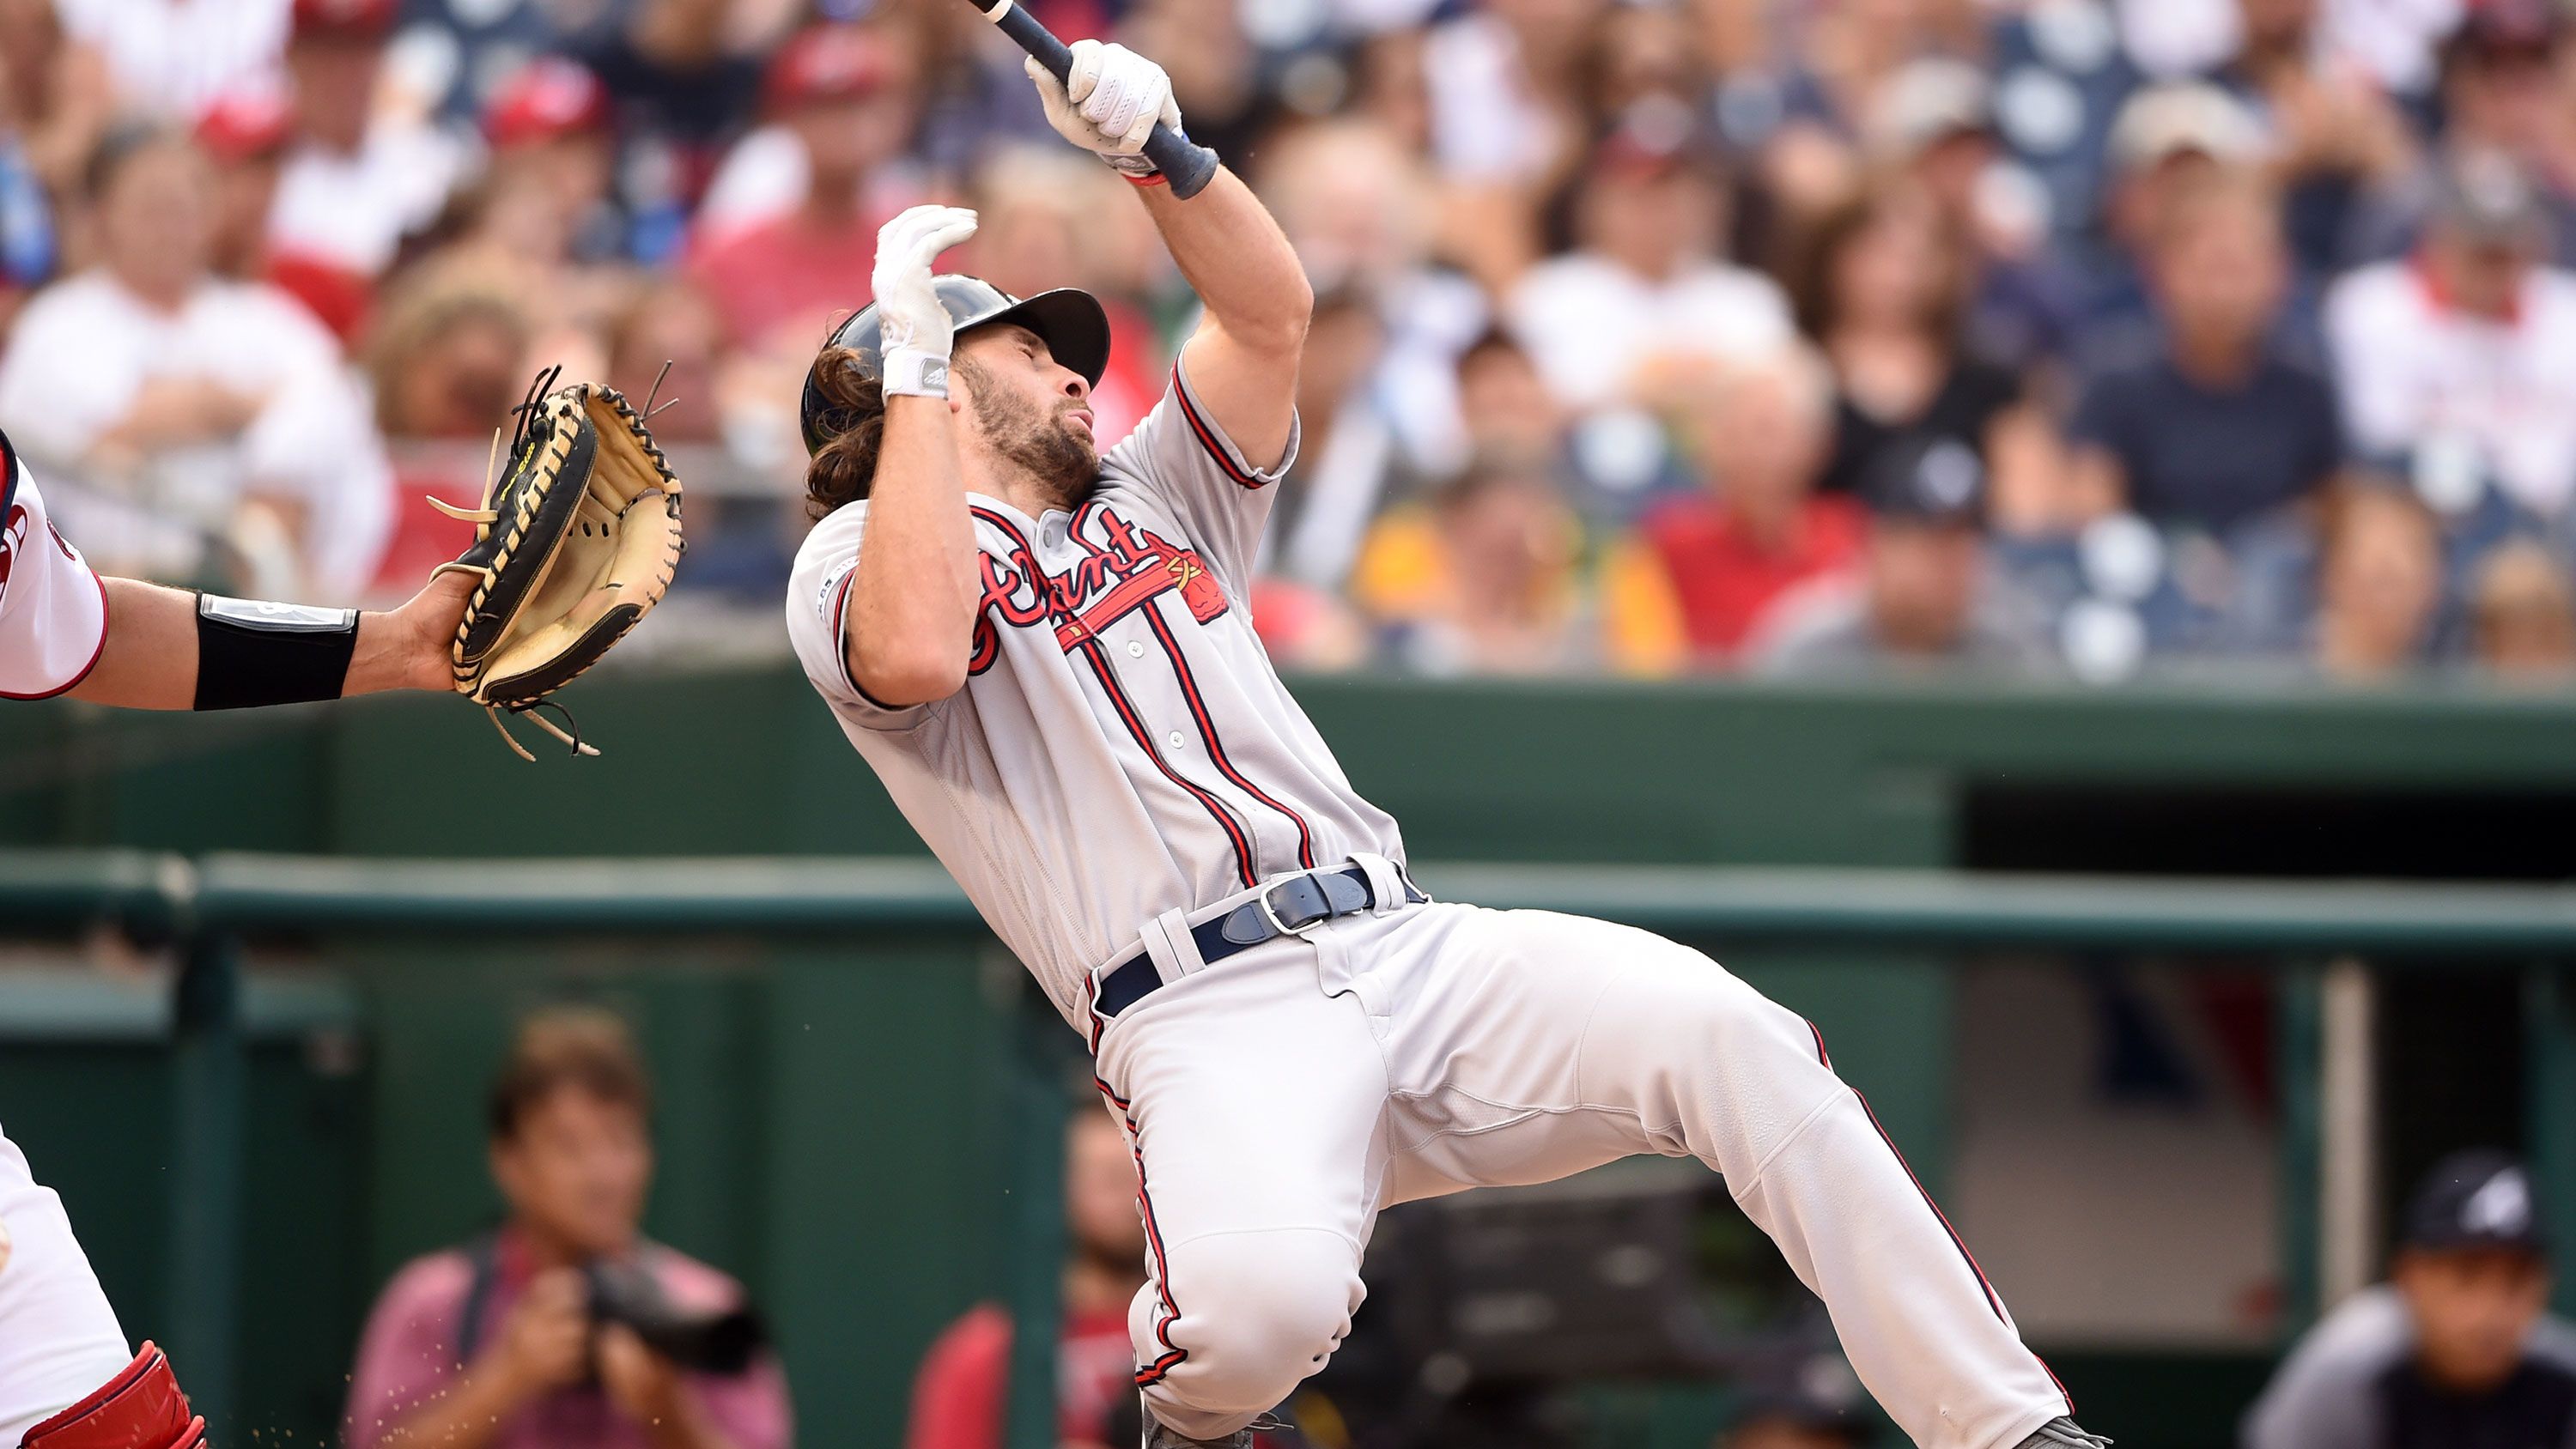 Atlanta Braves player Charlie Culberson hit in face by pitch